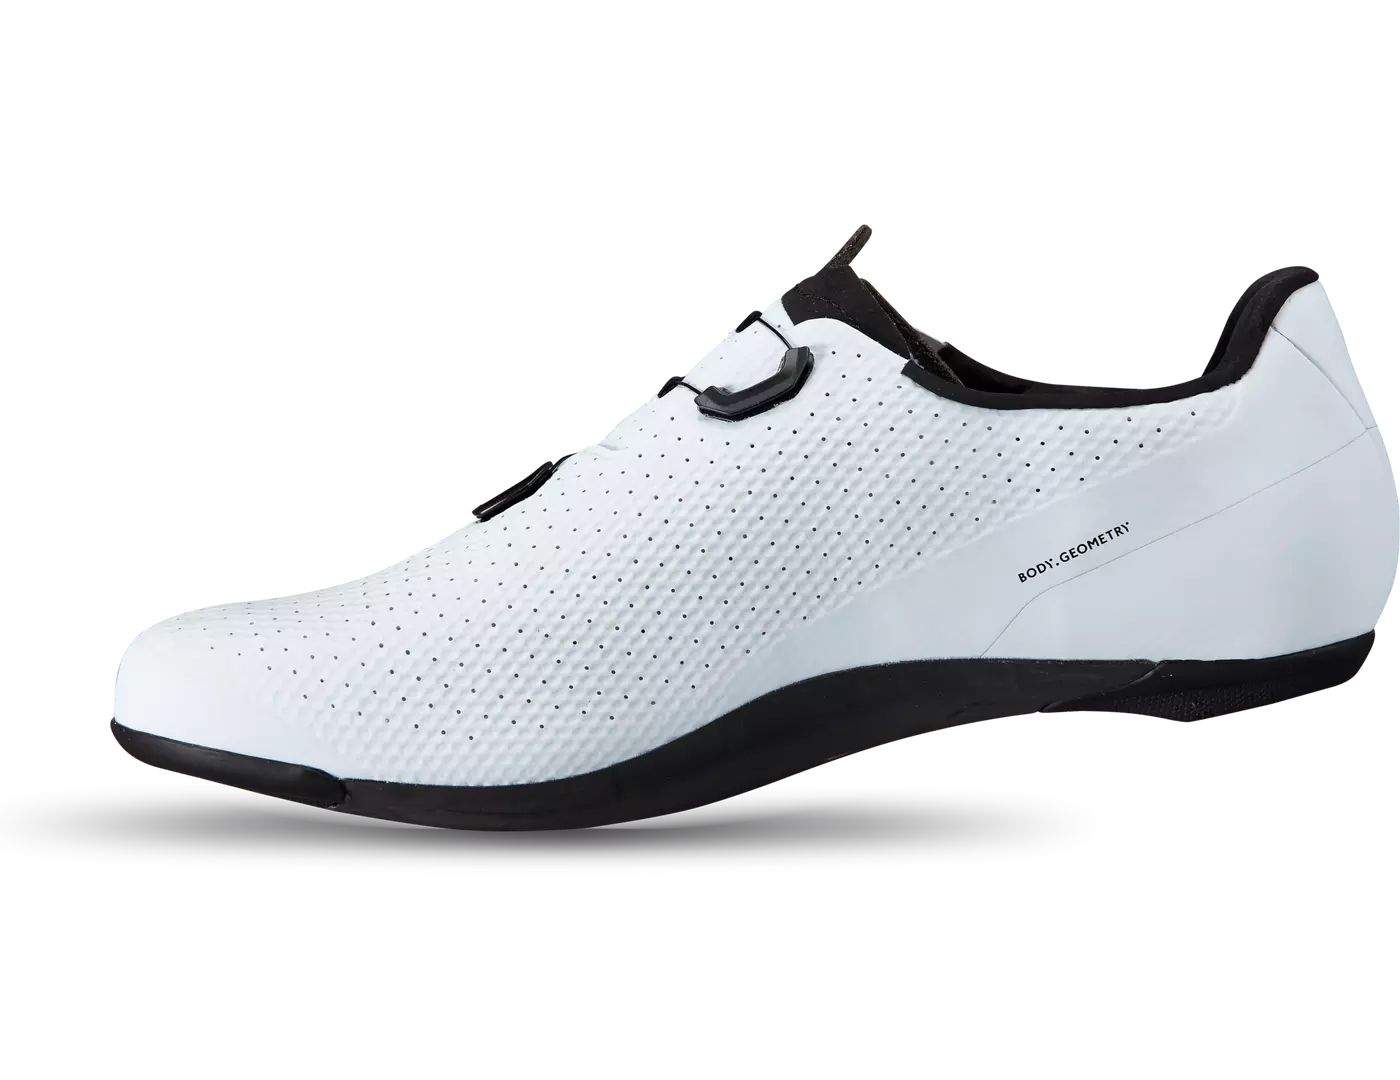 Torch 3.0 Road Shoes